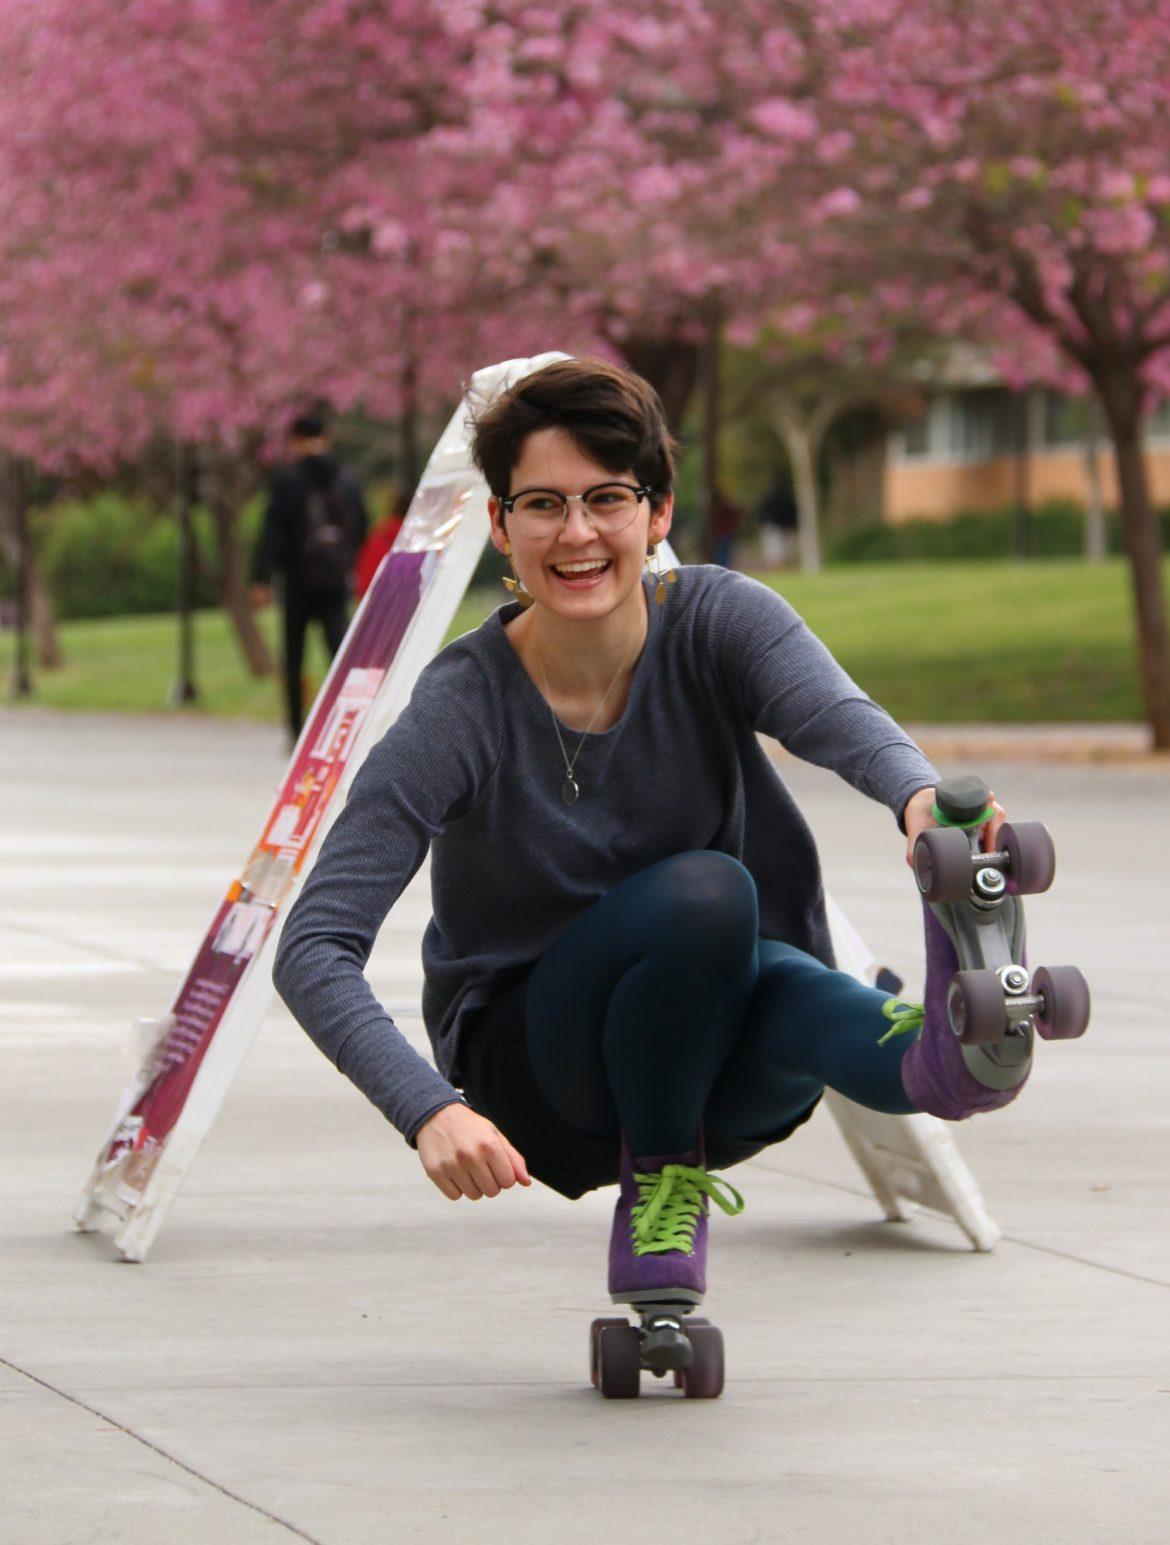 A female student roll with one roller skate